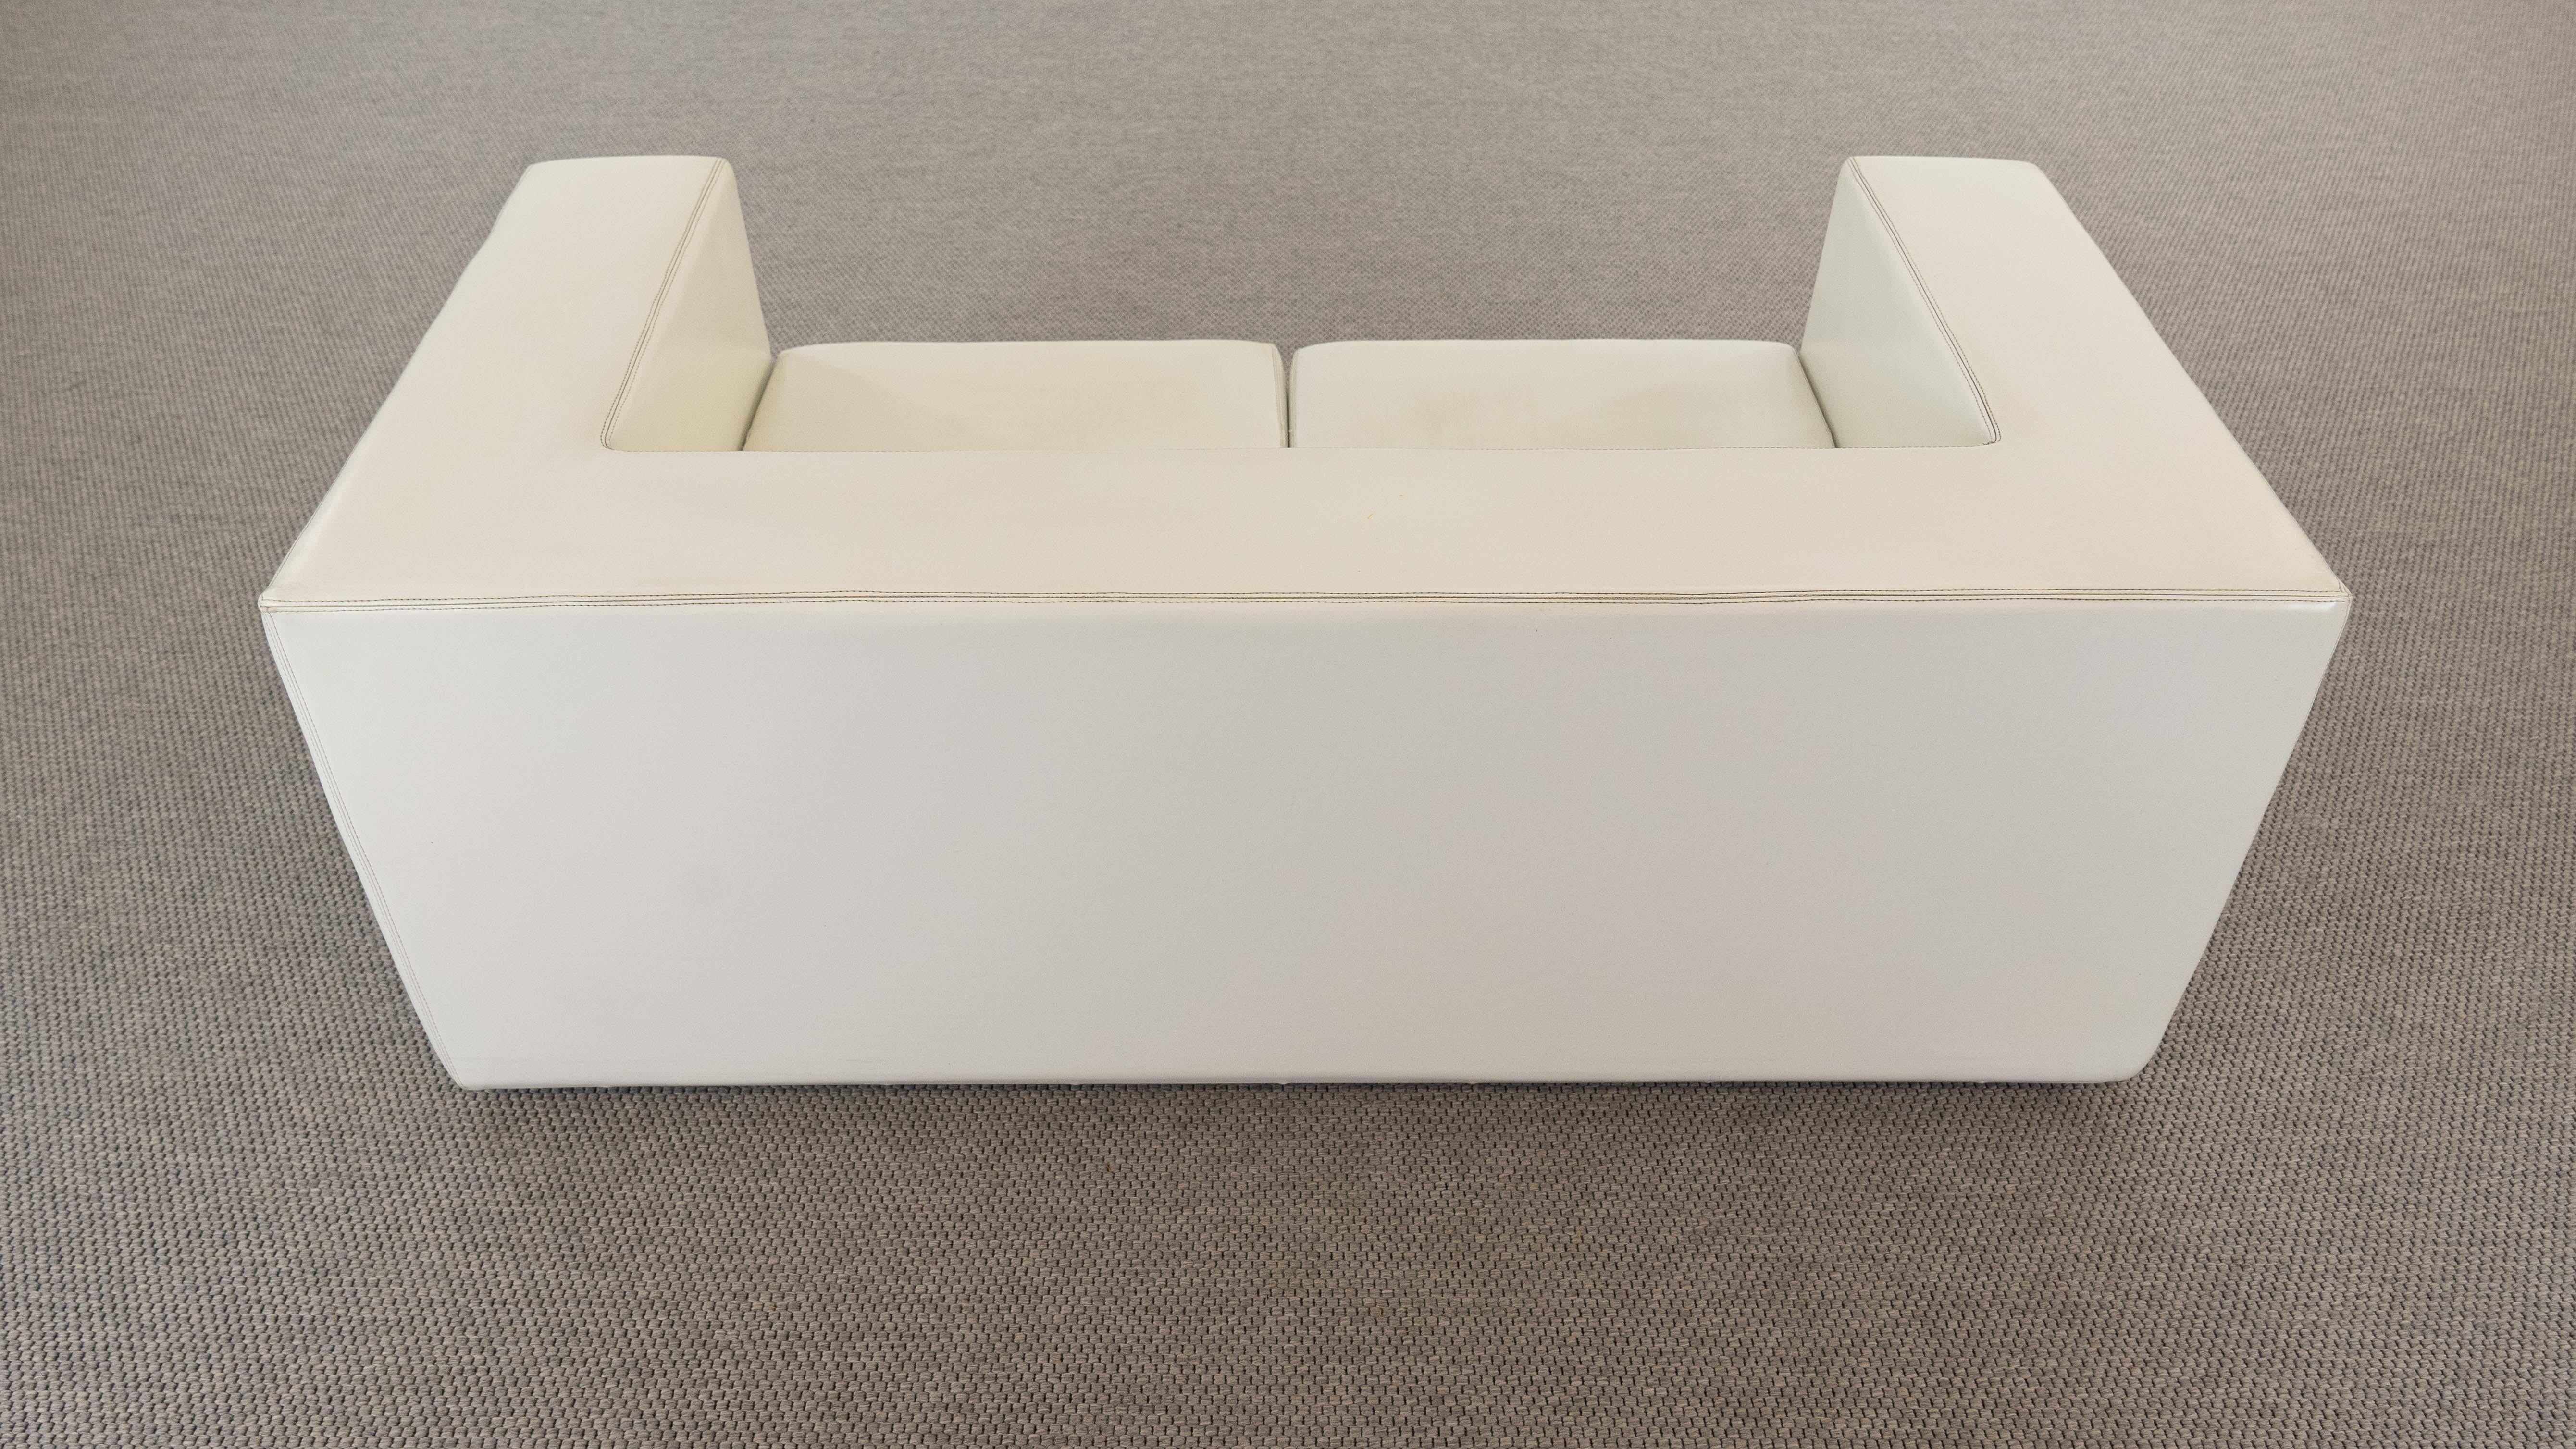 Mid-20th Century Throw Away Sofa by Willie Landels for Zanotta 1965 in White Vinyl For Sale